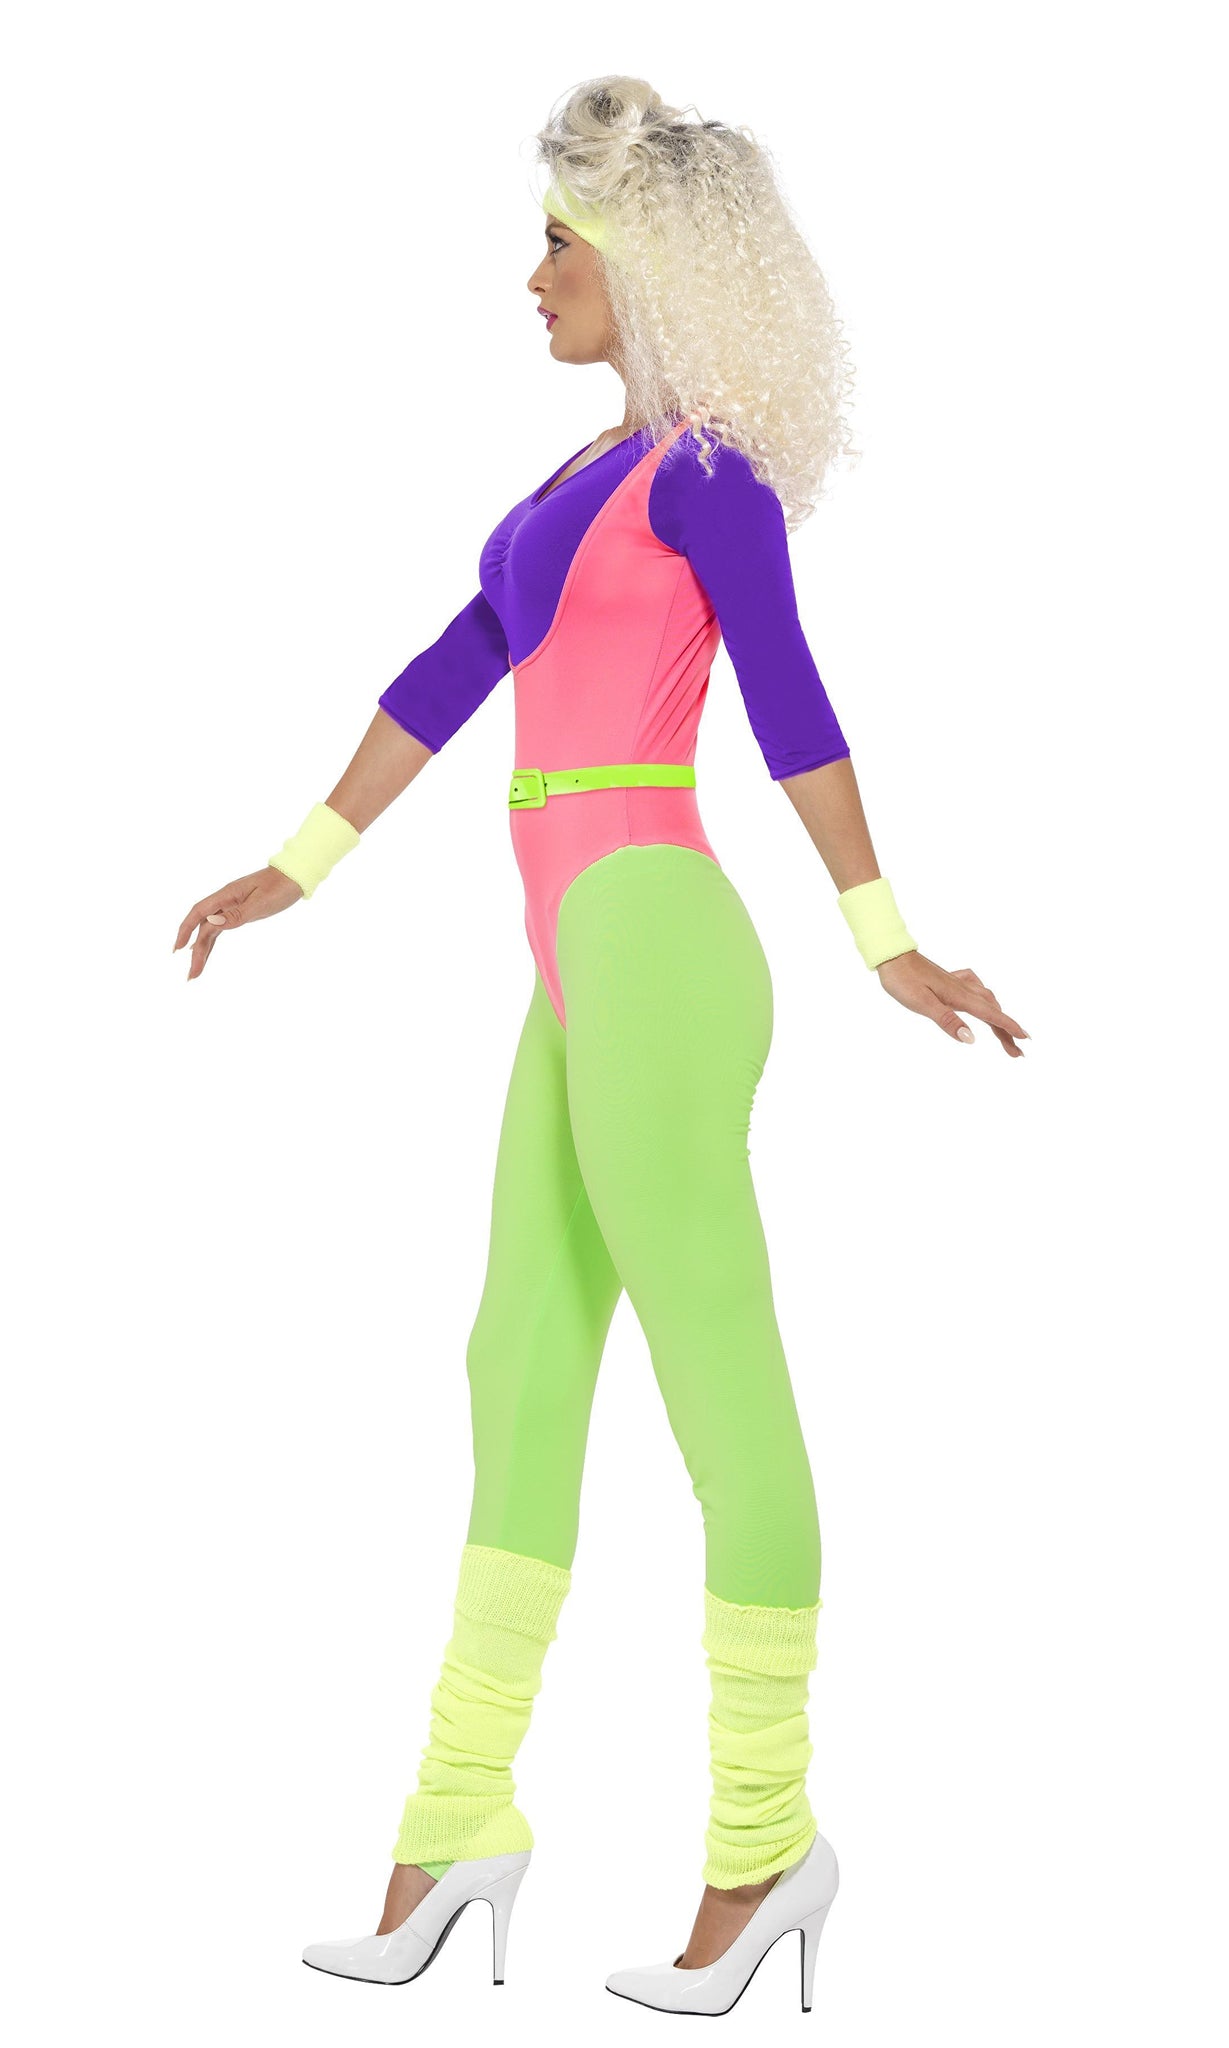 Side of 80s workout aerobics jumpsuit costume with headband and wristbands